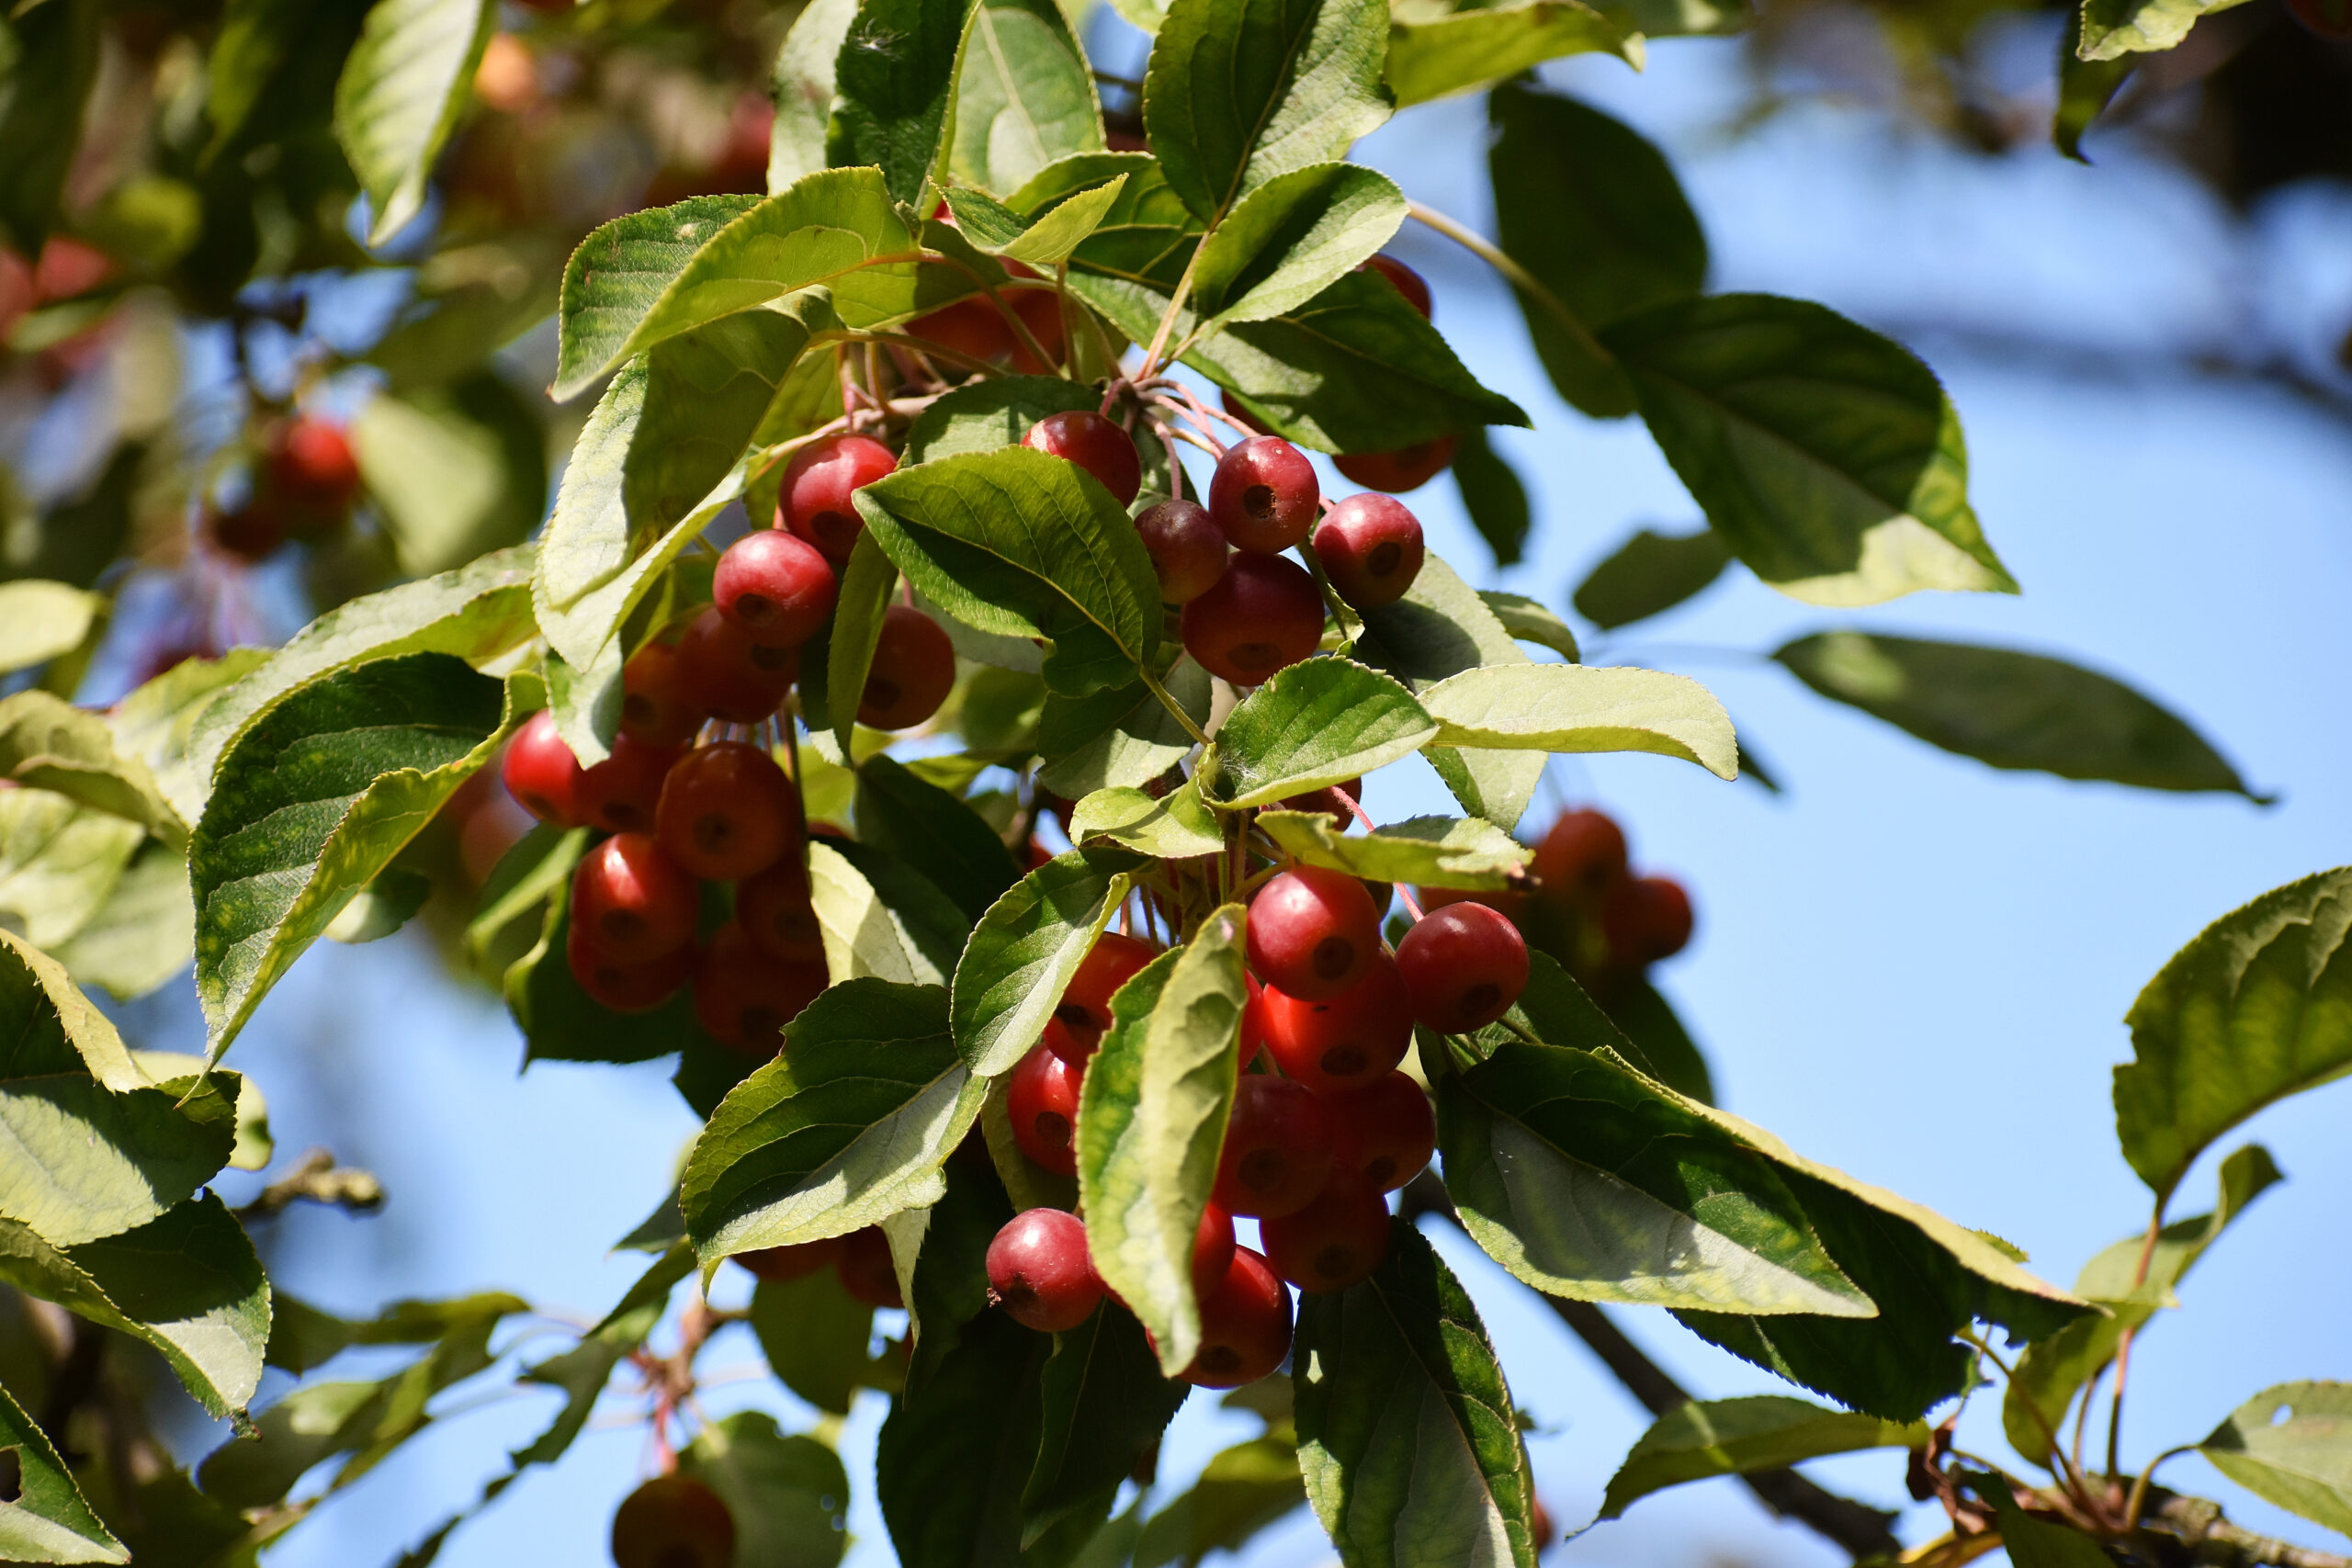 Malus hupehensis red berries and green leaves